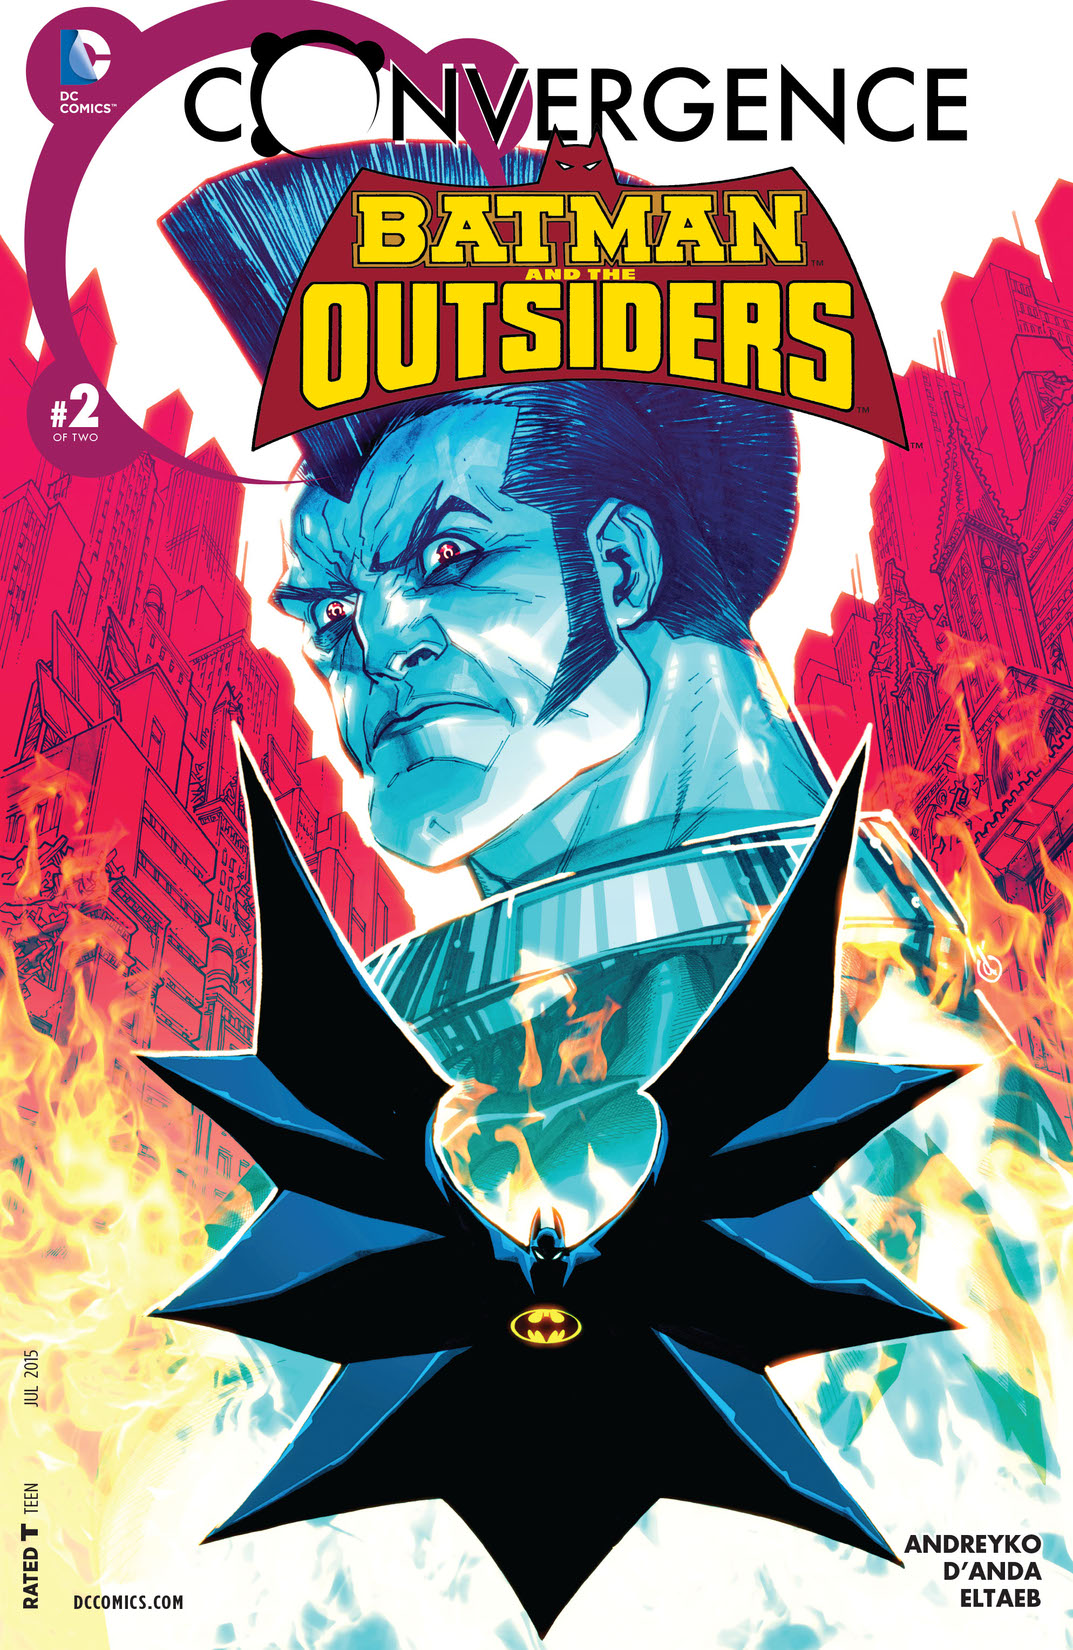 Convergence: Batman and the Outsiders #2 preview images